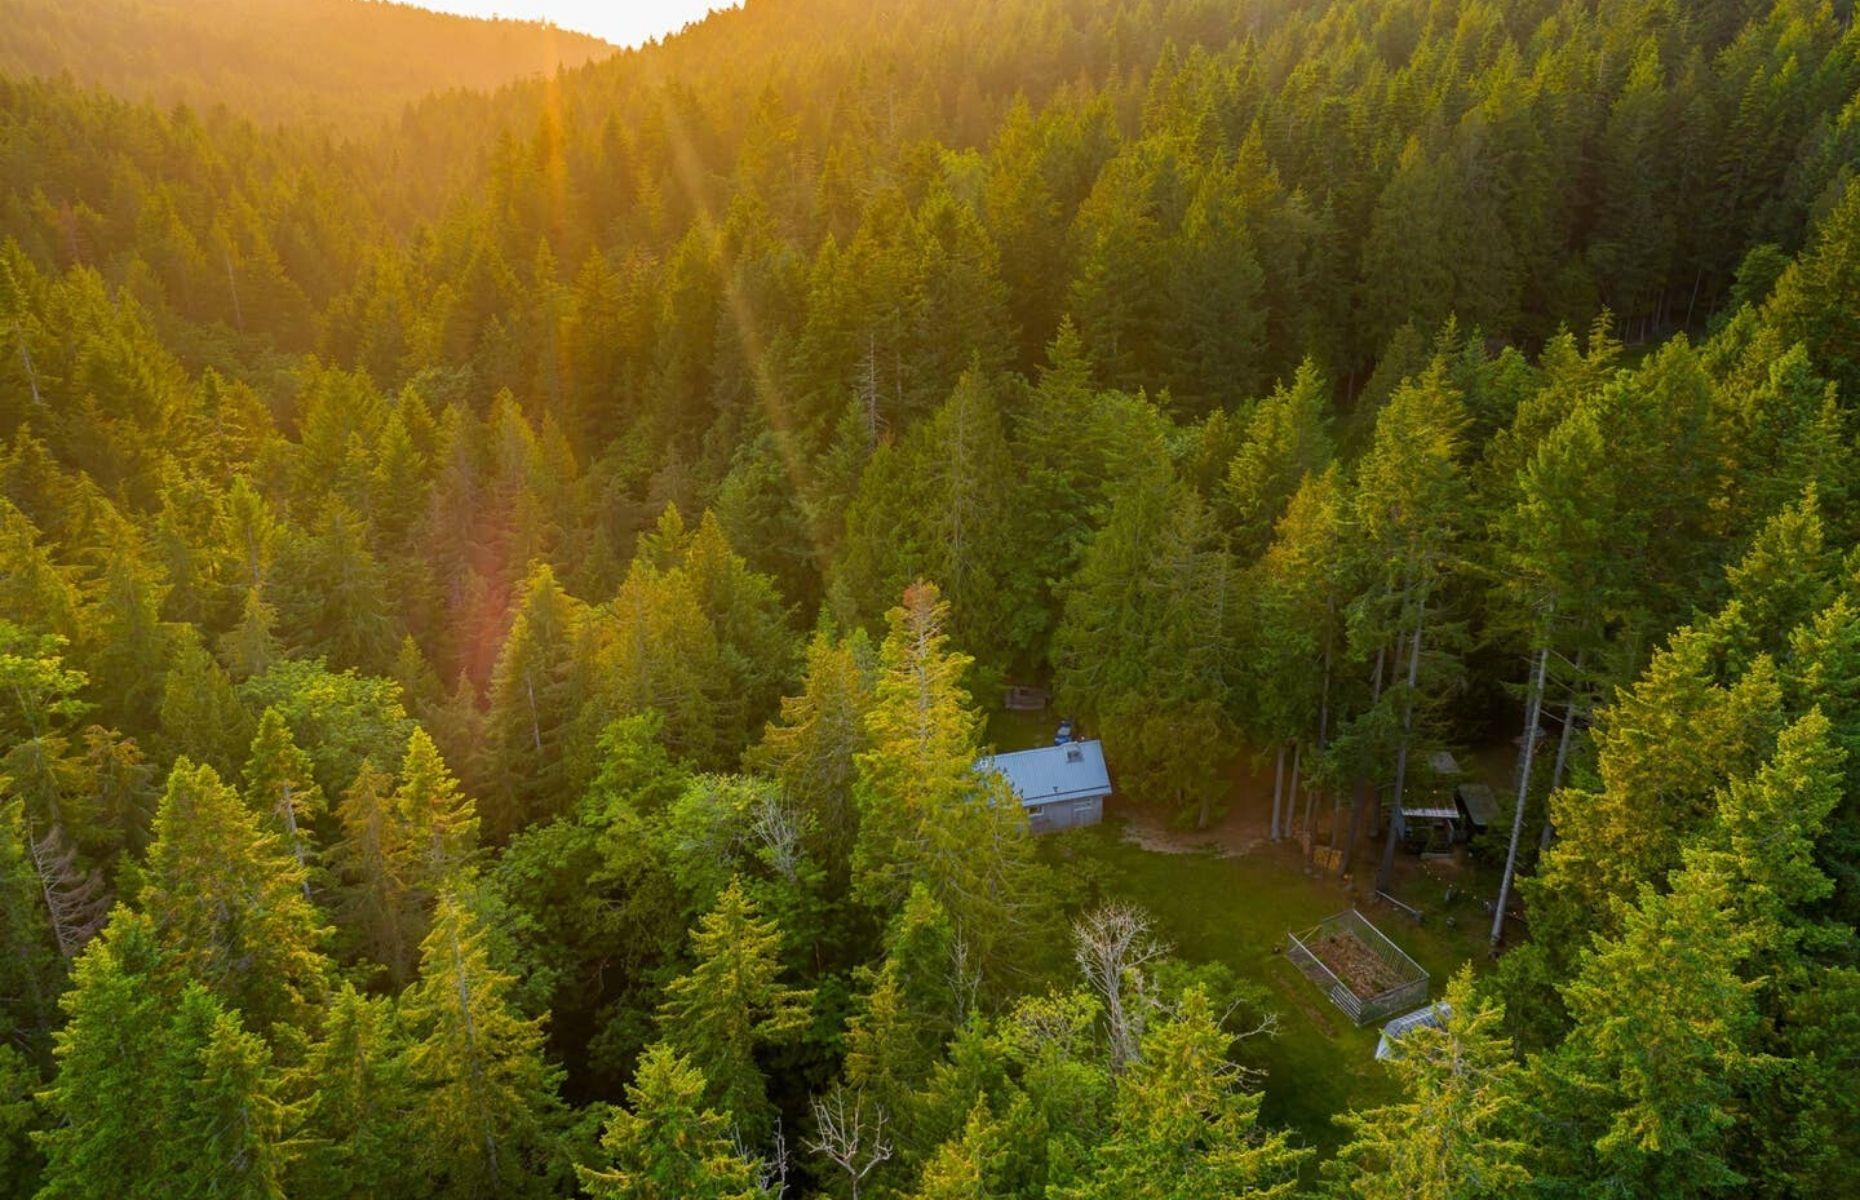 <p>This <a href="https://www.airbnb.co.uk/rooms/24869992?">Airbnb</a> tiny home can be found nestled in the woods of the highly sought-after Salt Spring Island in British Columbia. Just moments from Mount Maxwell Provincial Park, this custom-made cabin was built in 2019 and makes the most of the serene mountain landscape around which it stands. With three charming acres of land to play with, as well as an attractive creek, this dreamy dwelling is pure bliss.</p>